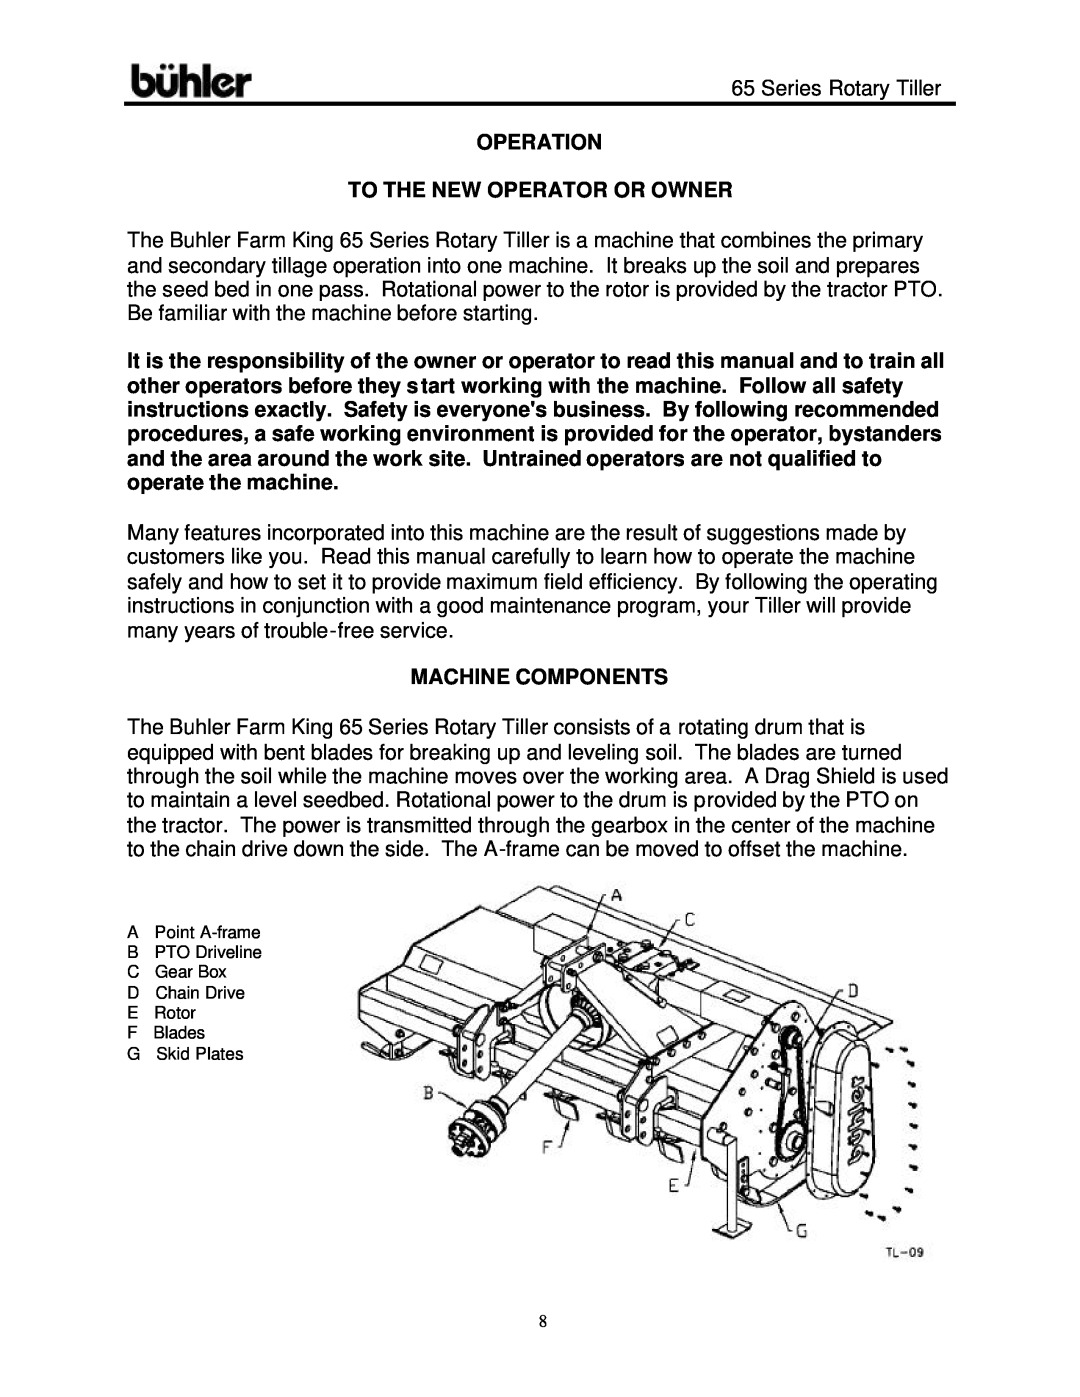 Buhler FK302 warranty Operation To The New Operator Or Owner, Machine Components 